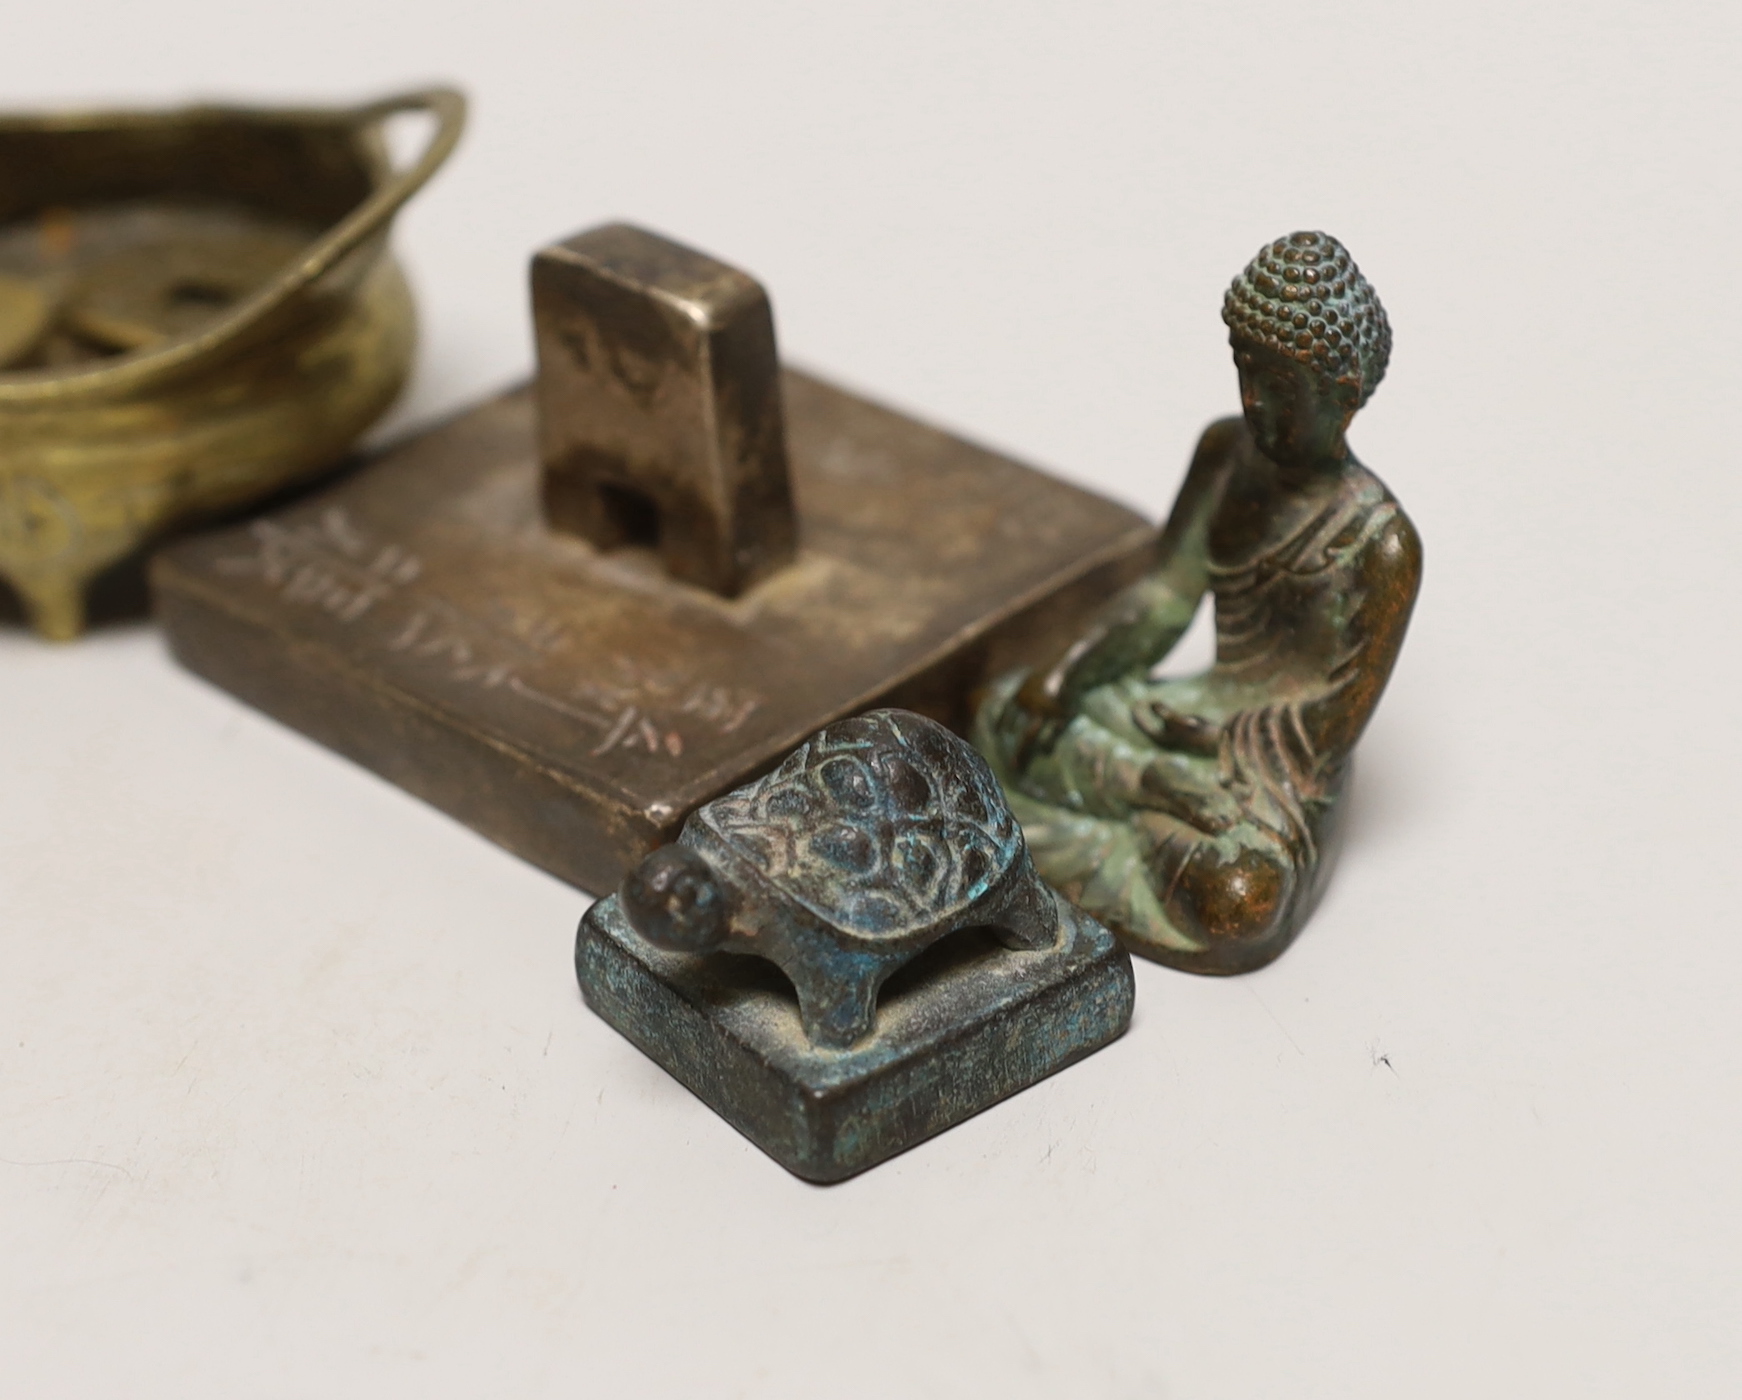 Five Chinese coins, five seals and a miniature censer